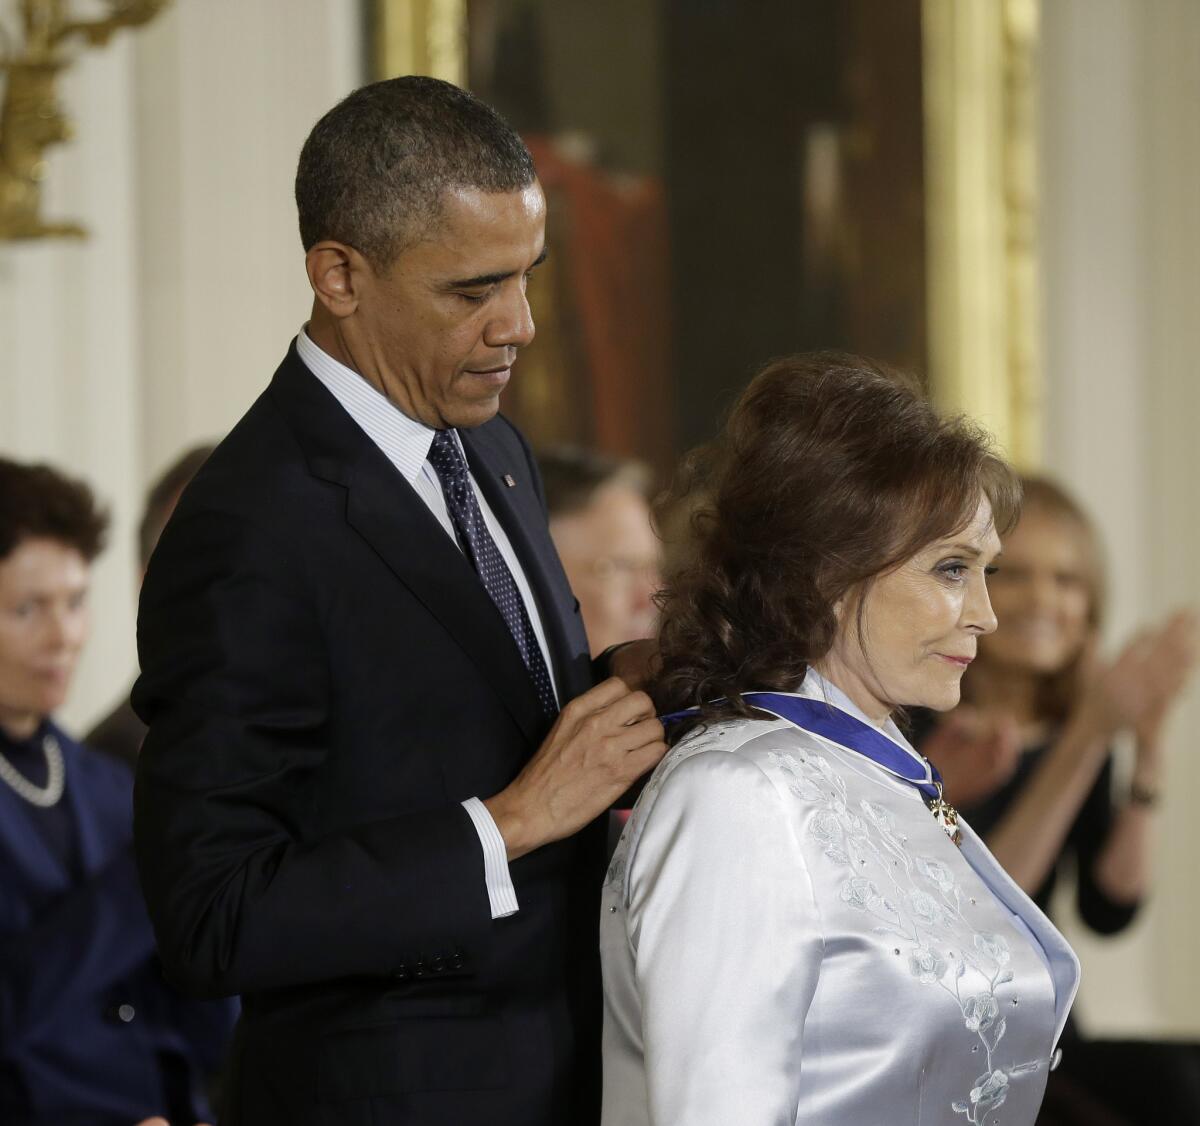 President Obama awards country music legend Loretta Lynn the Presidential Medal of Freedom on Nov. 20, 2013, during a ceremony at the White House in Washington.